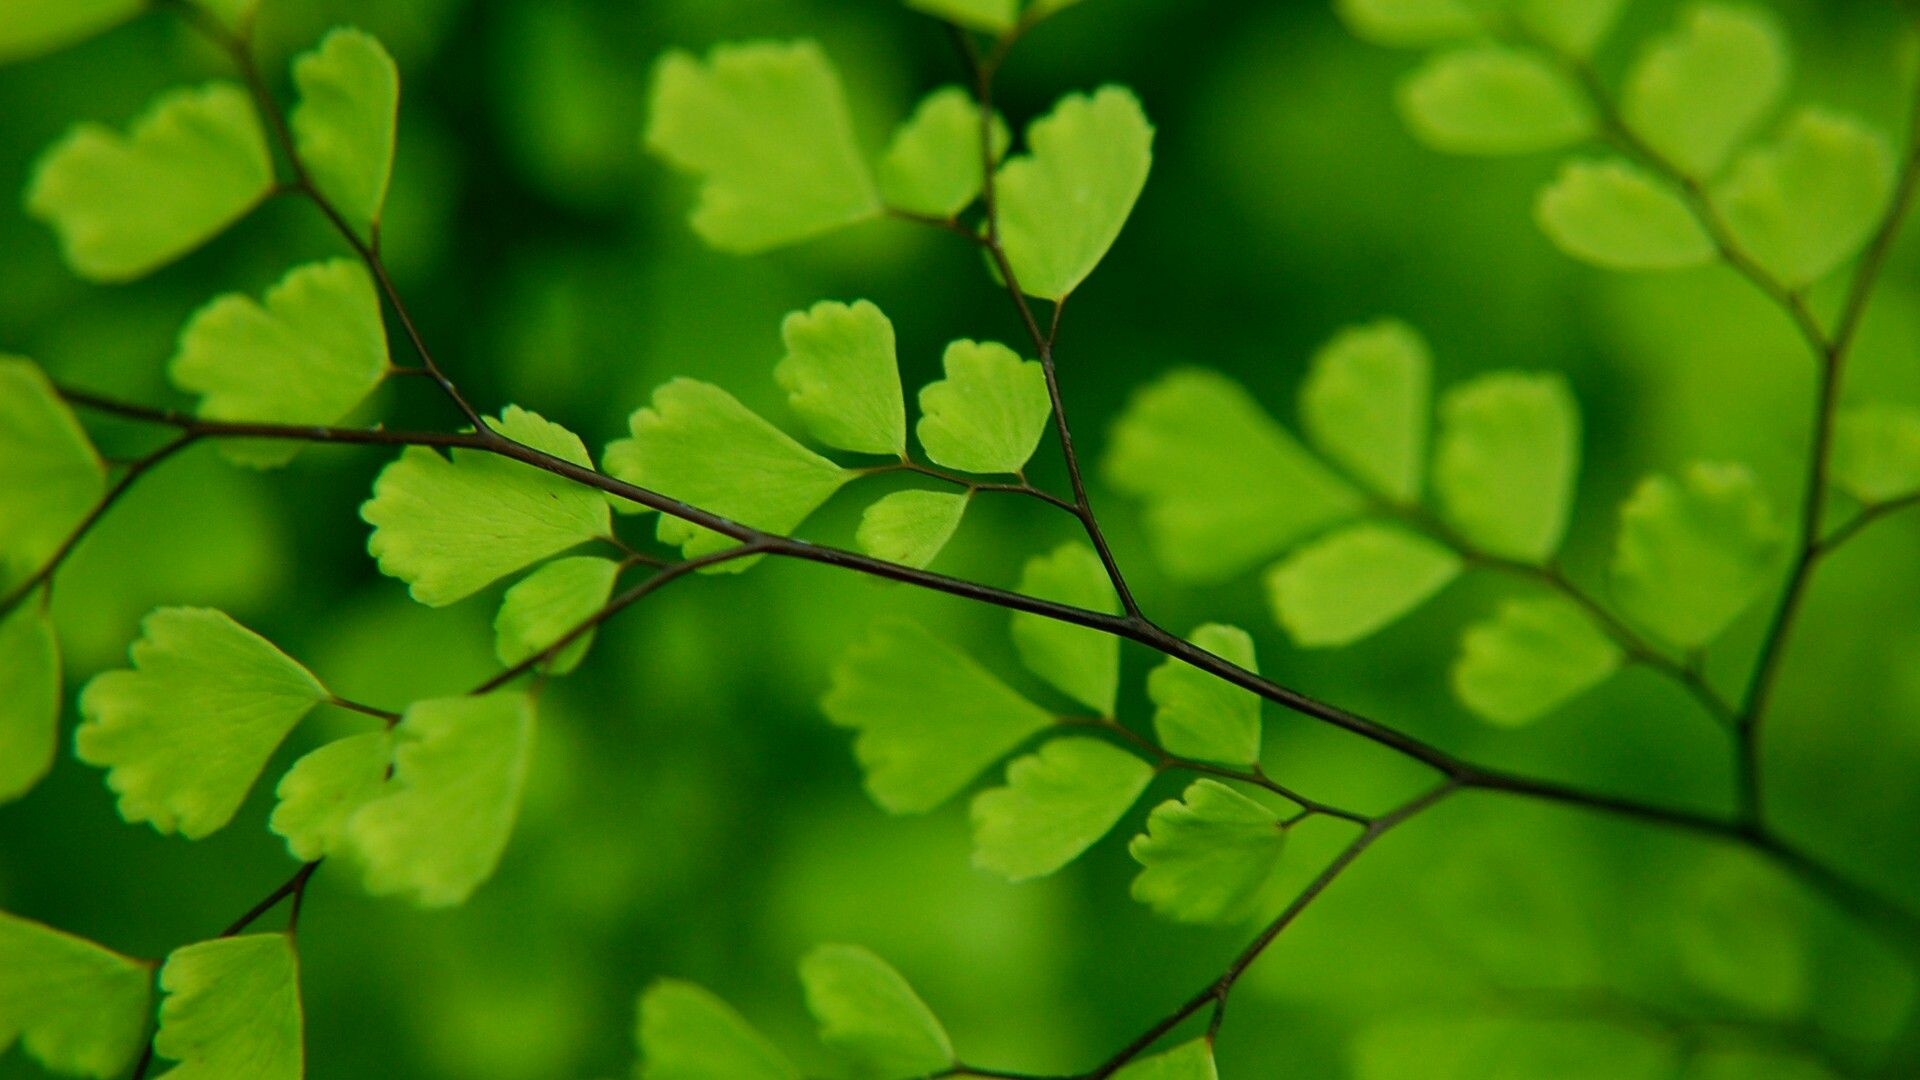 Leaf: Has a broad expanded blade, attached to the stem by a stalklike petiole. 1920x1080 Full HD Wallpaper.